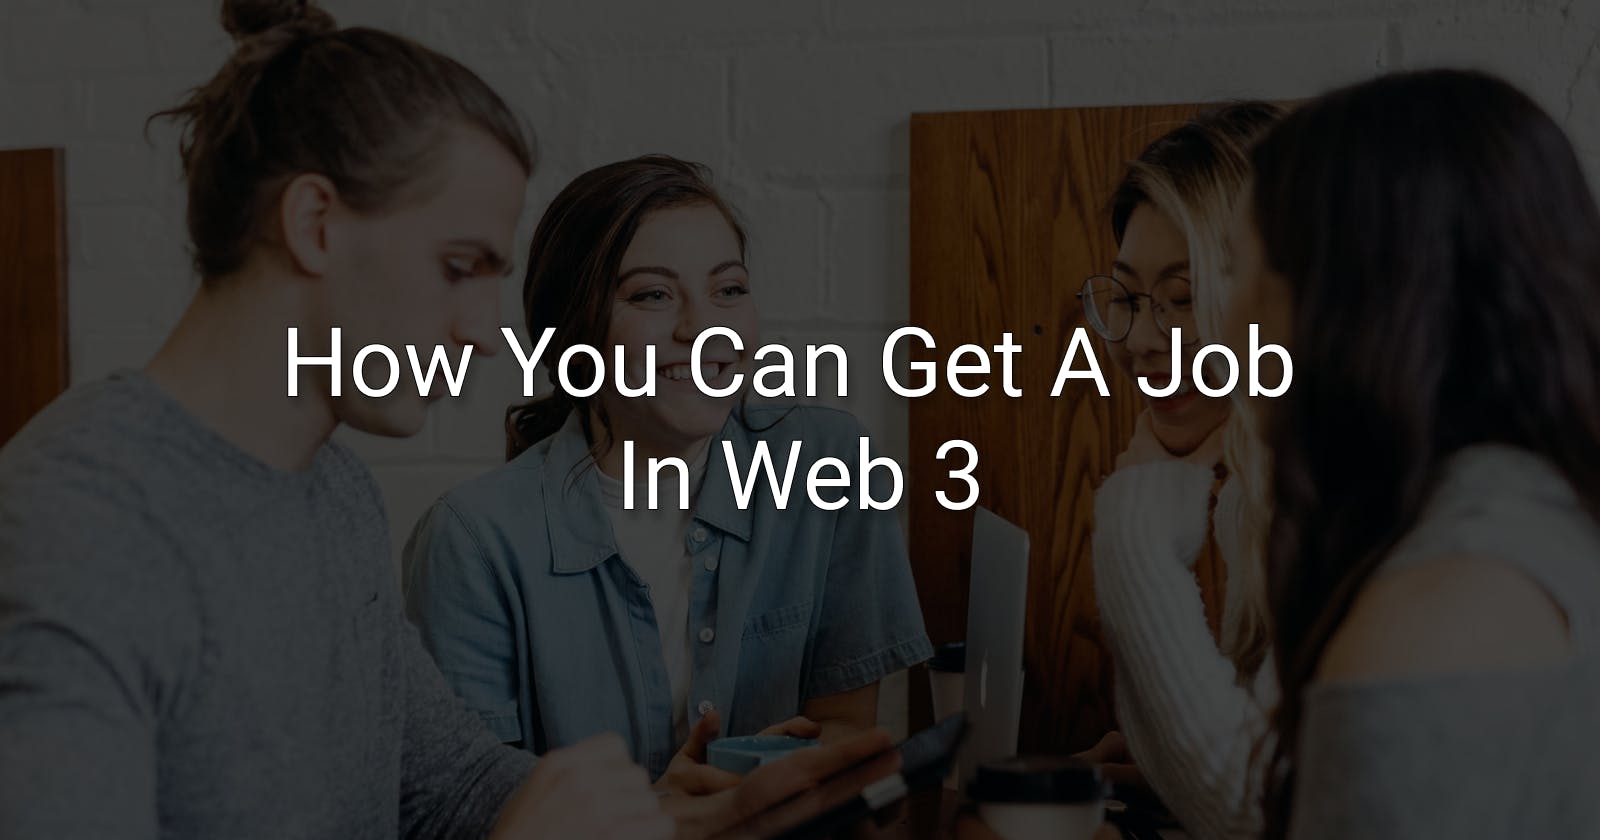 How You Can Get A Job In Web 3